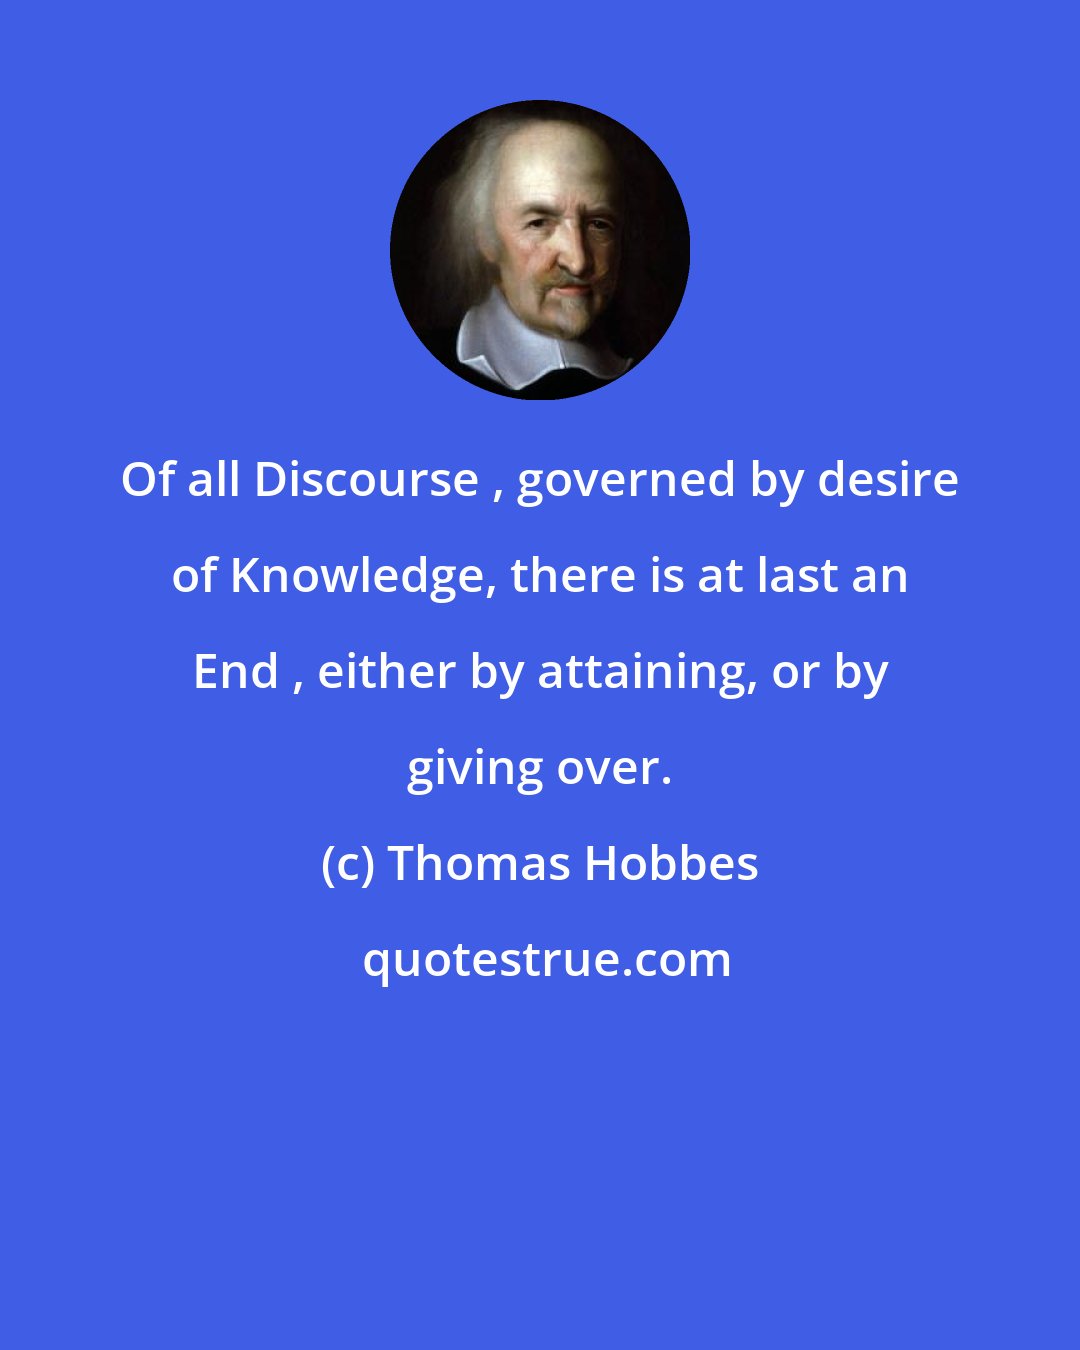 Thomas Hobbes: Of all Discourse , governed by desire of Knowledge, there is at last an End , either by attaining, or by giving over.